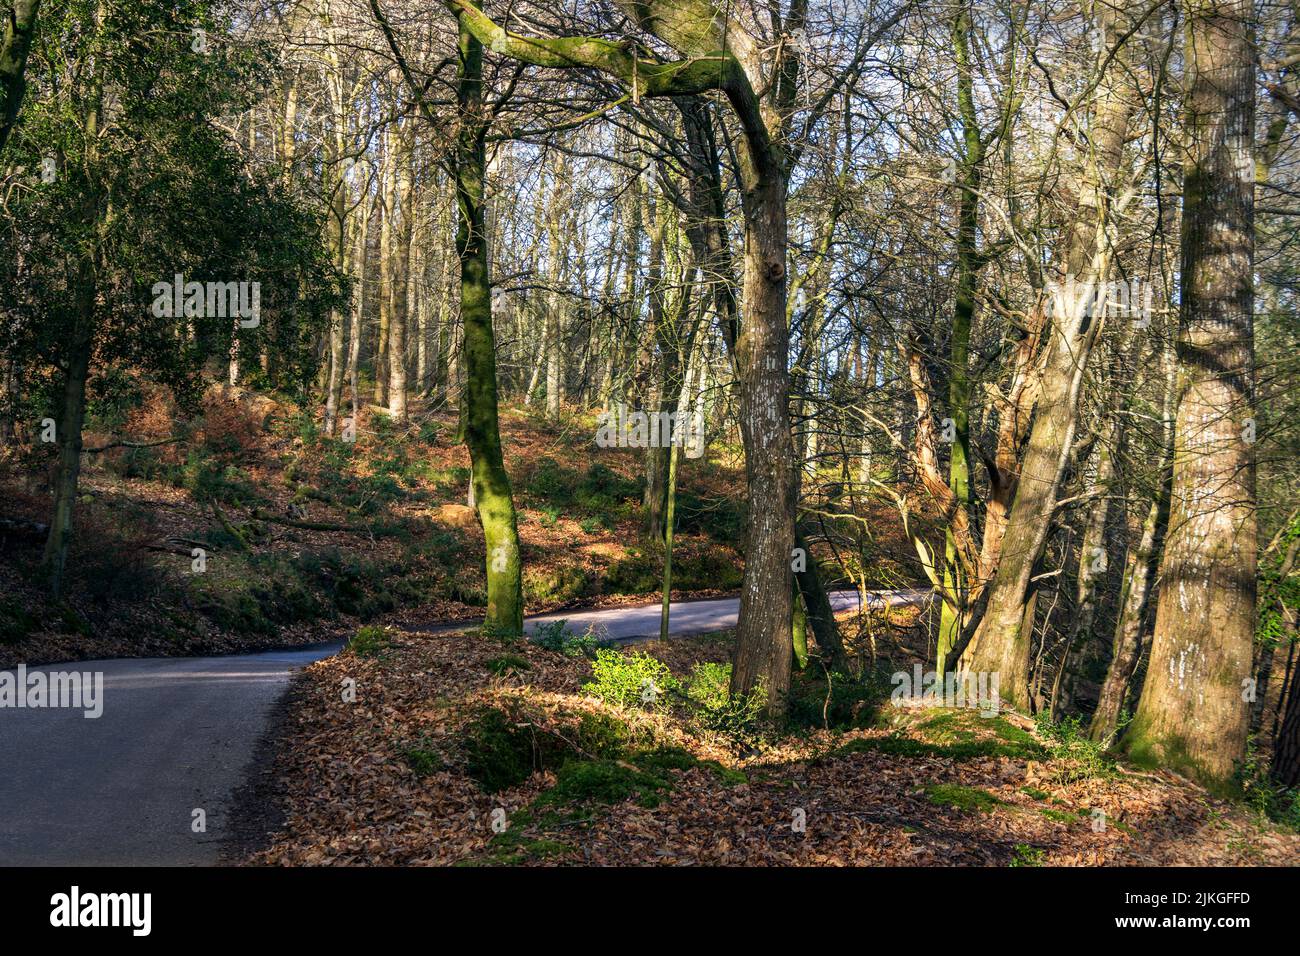 A woodland scene near Exmoor National park in Devon, Uk. The winter sunshine lights up the moss and leaf litter on the ground Stock Photo